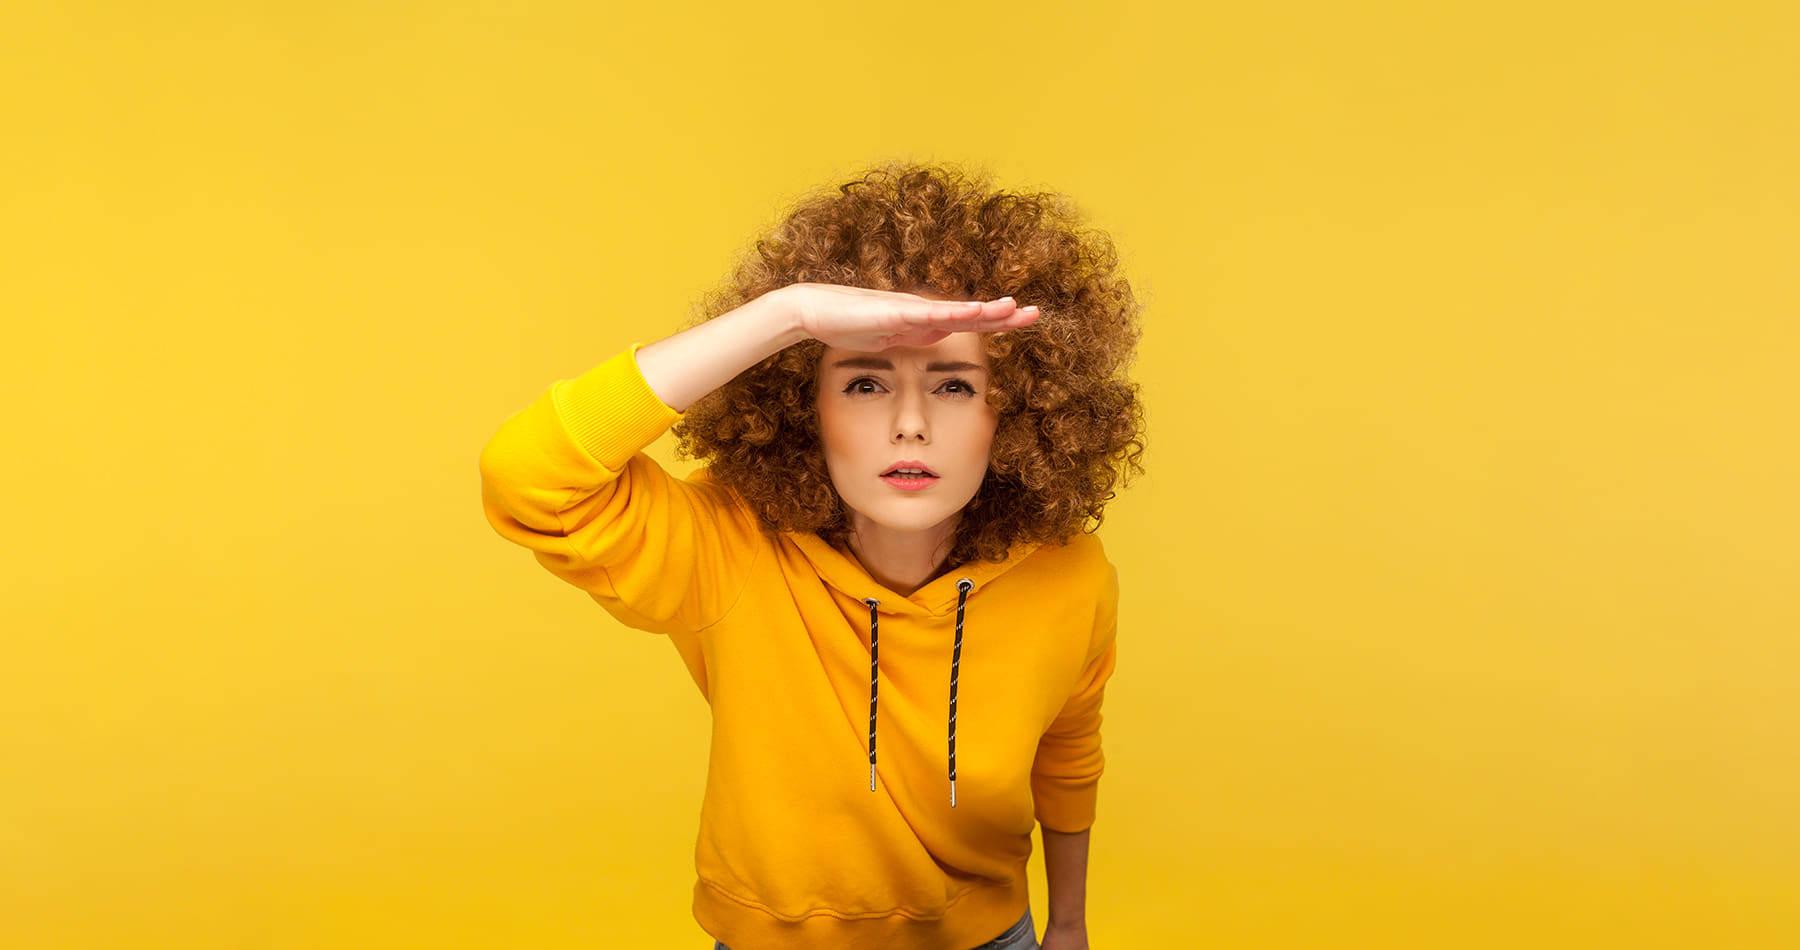 Woman against yellow background searching for something